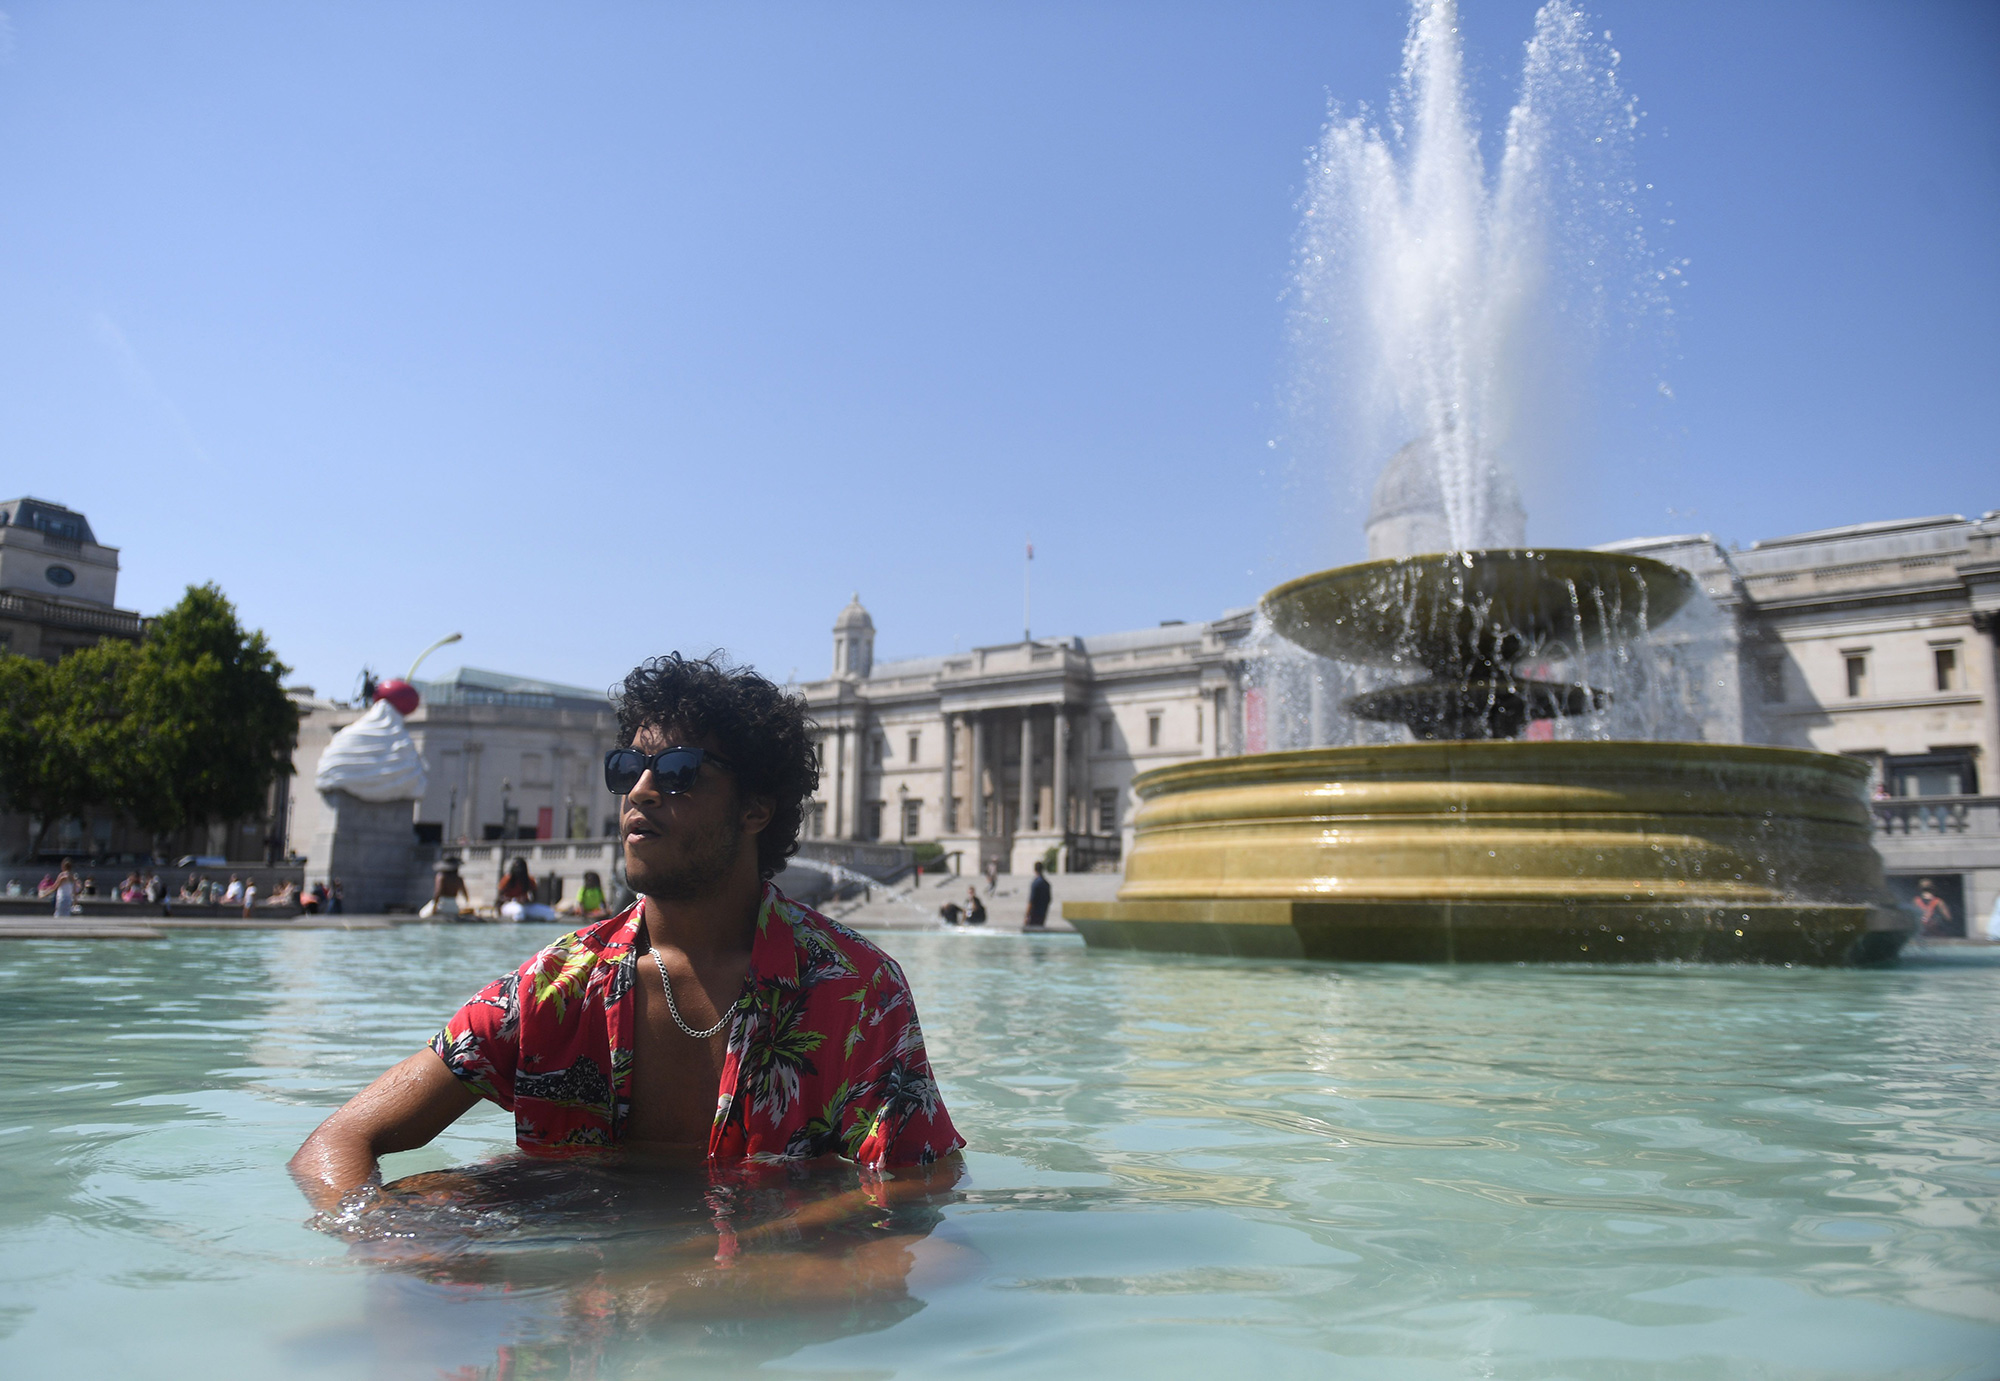 A man cools himself in a fountain at Trafalgar Square in London, England, on Tuesday, July 19.